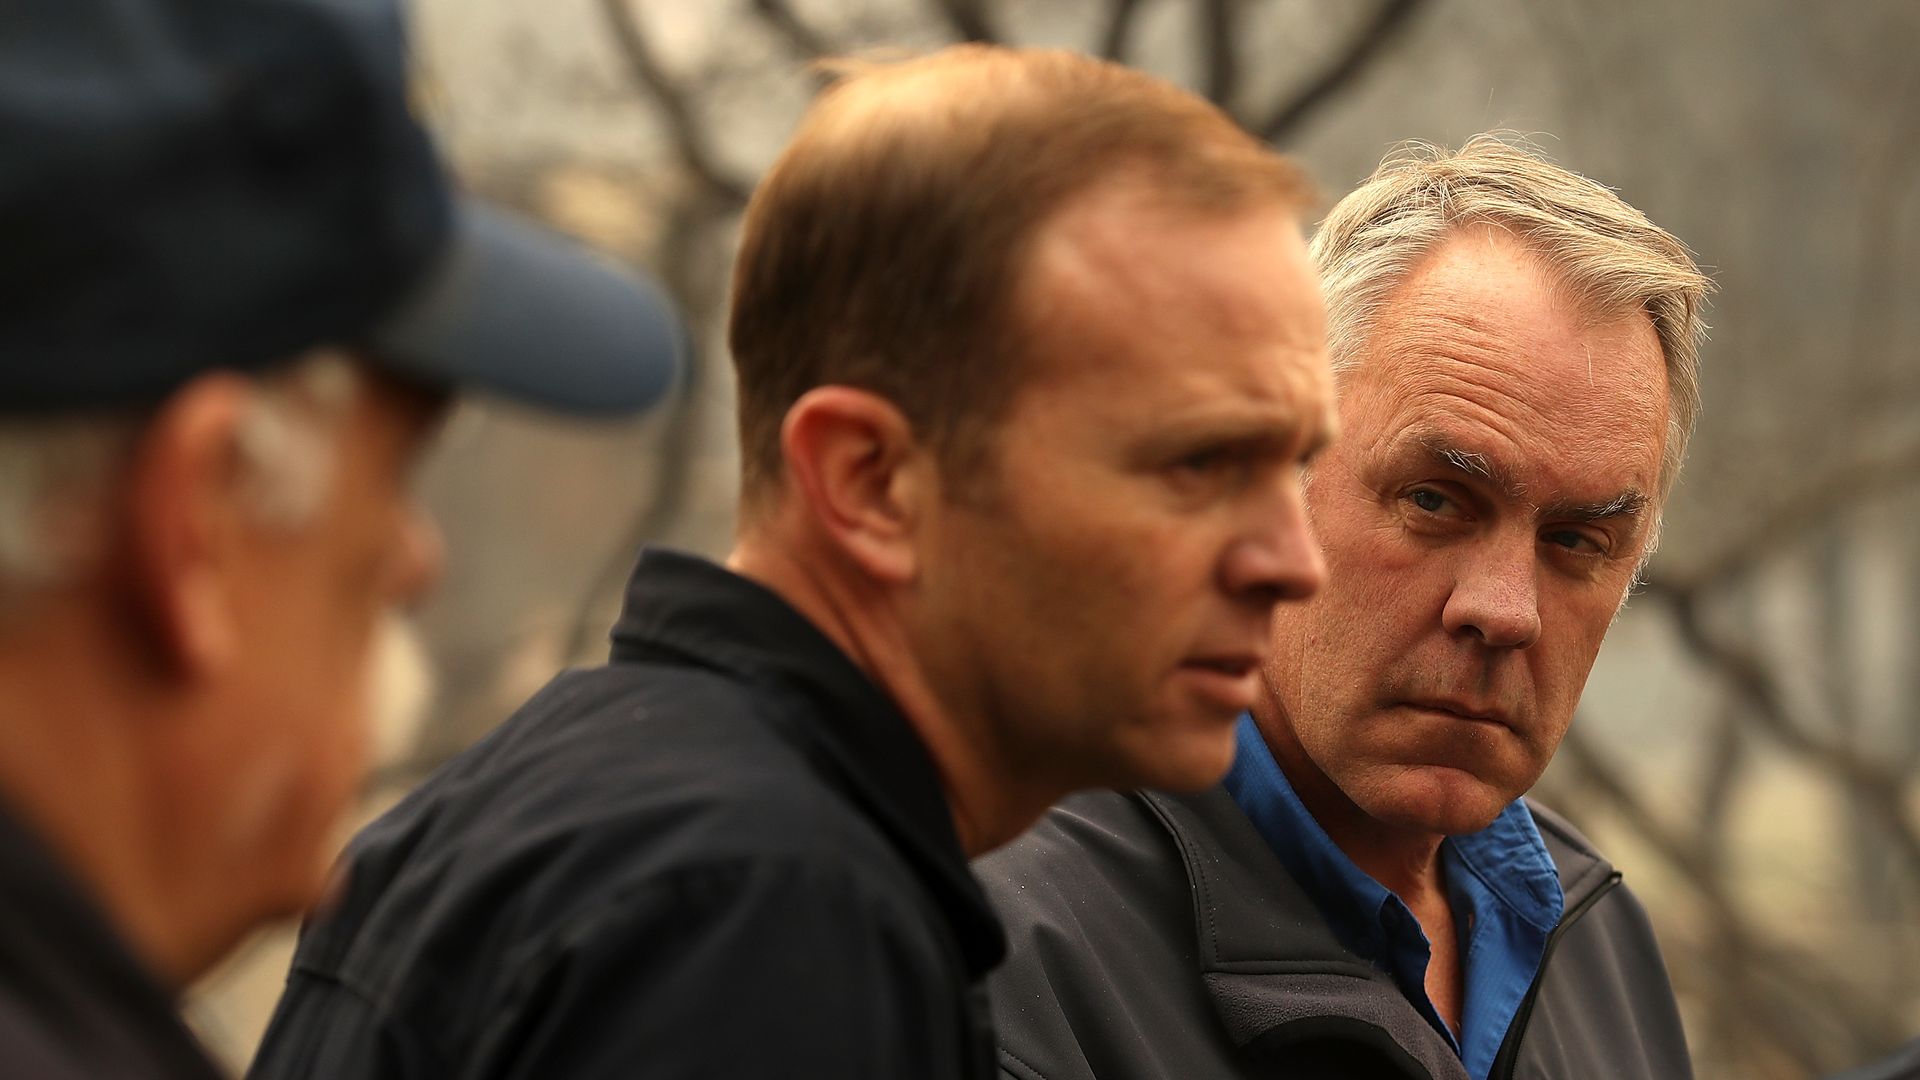 Ryan Zinke and two other men talking.